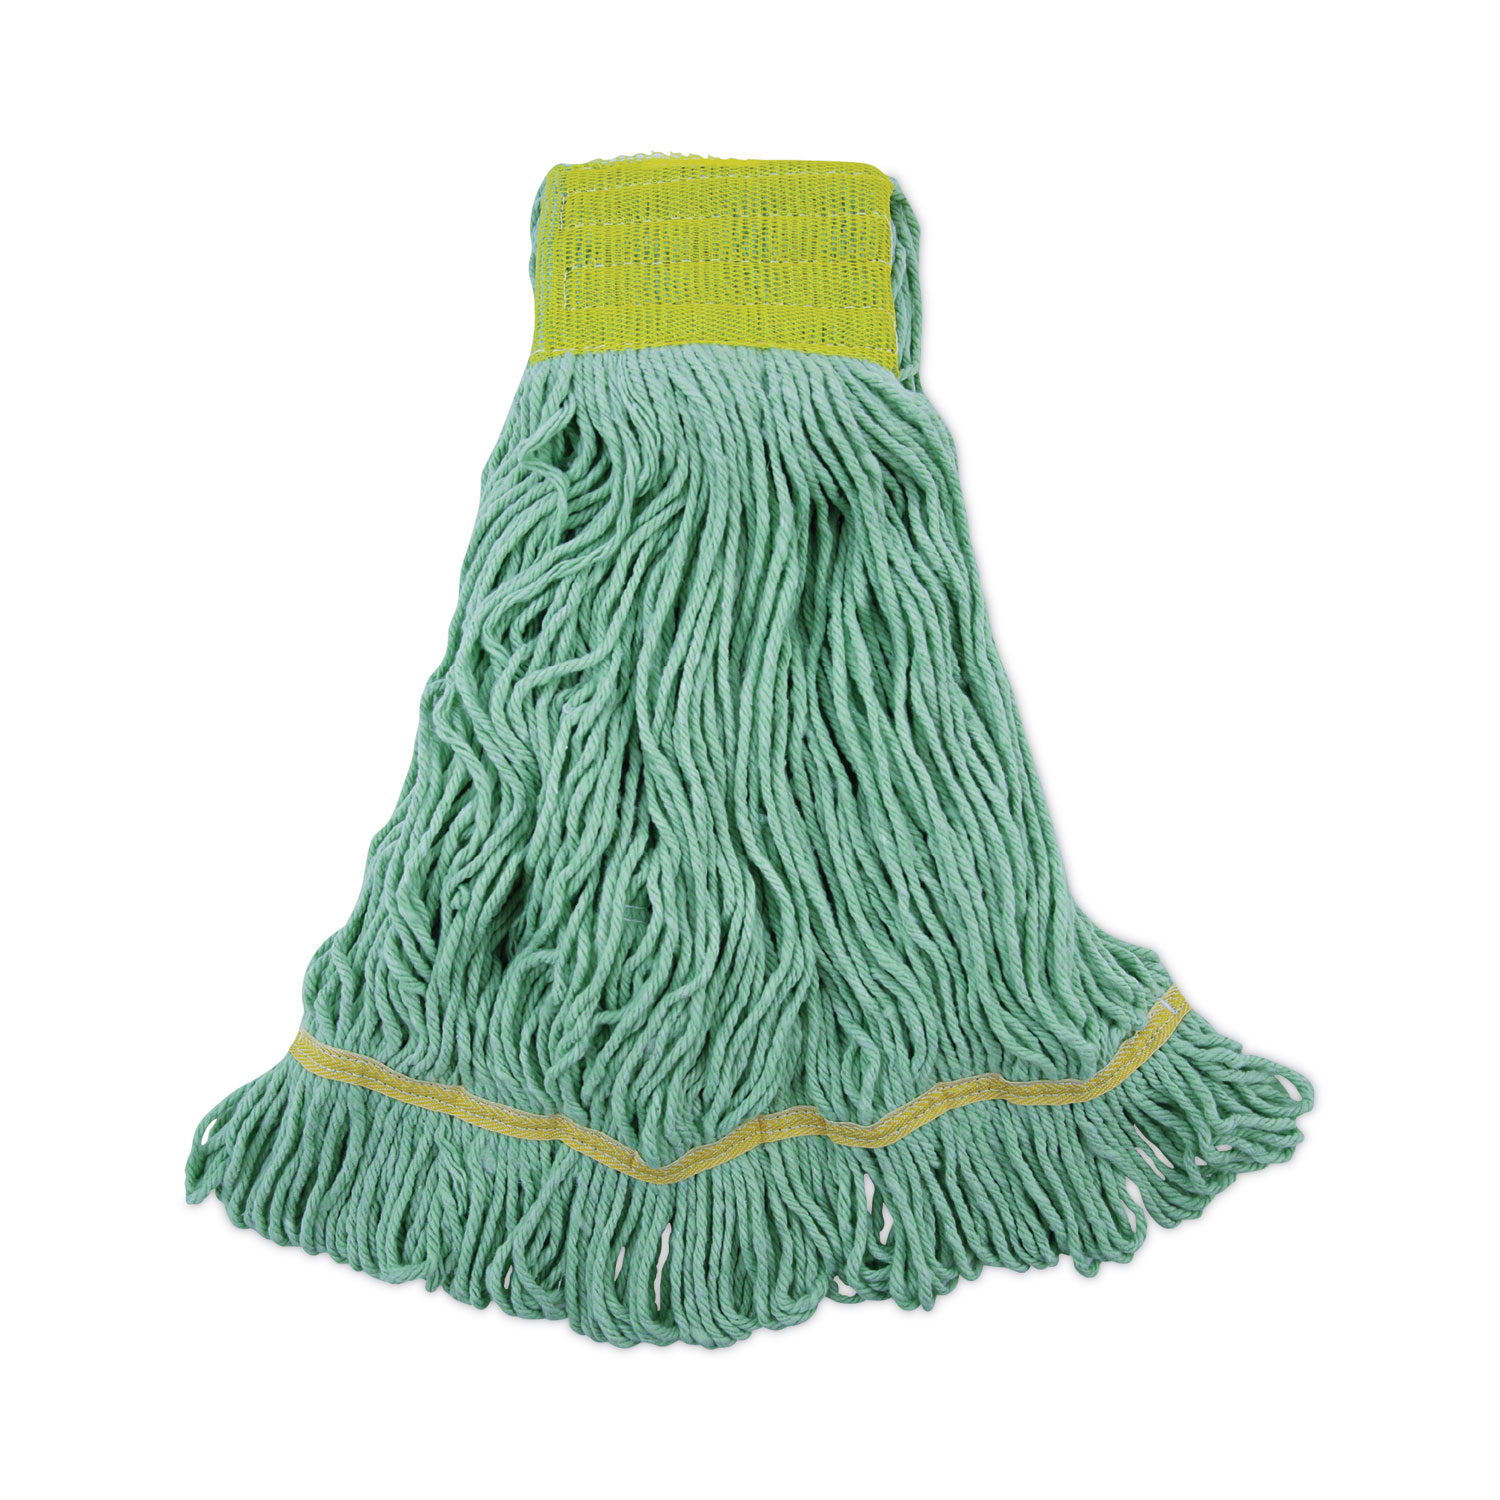 Abco Blended Looped End Mop - Small, Green